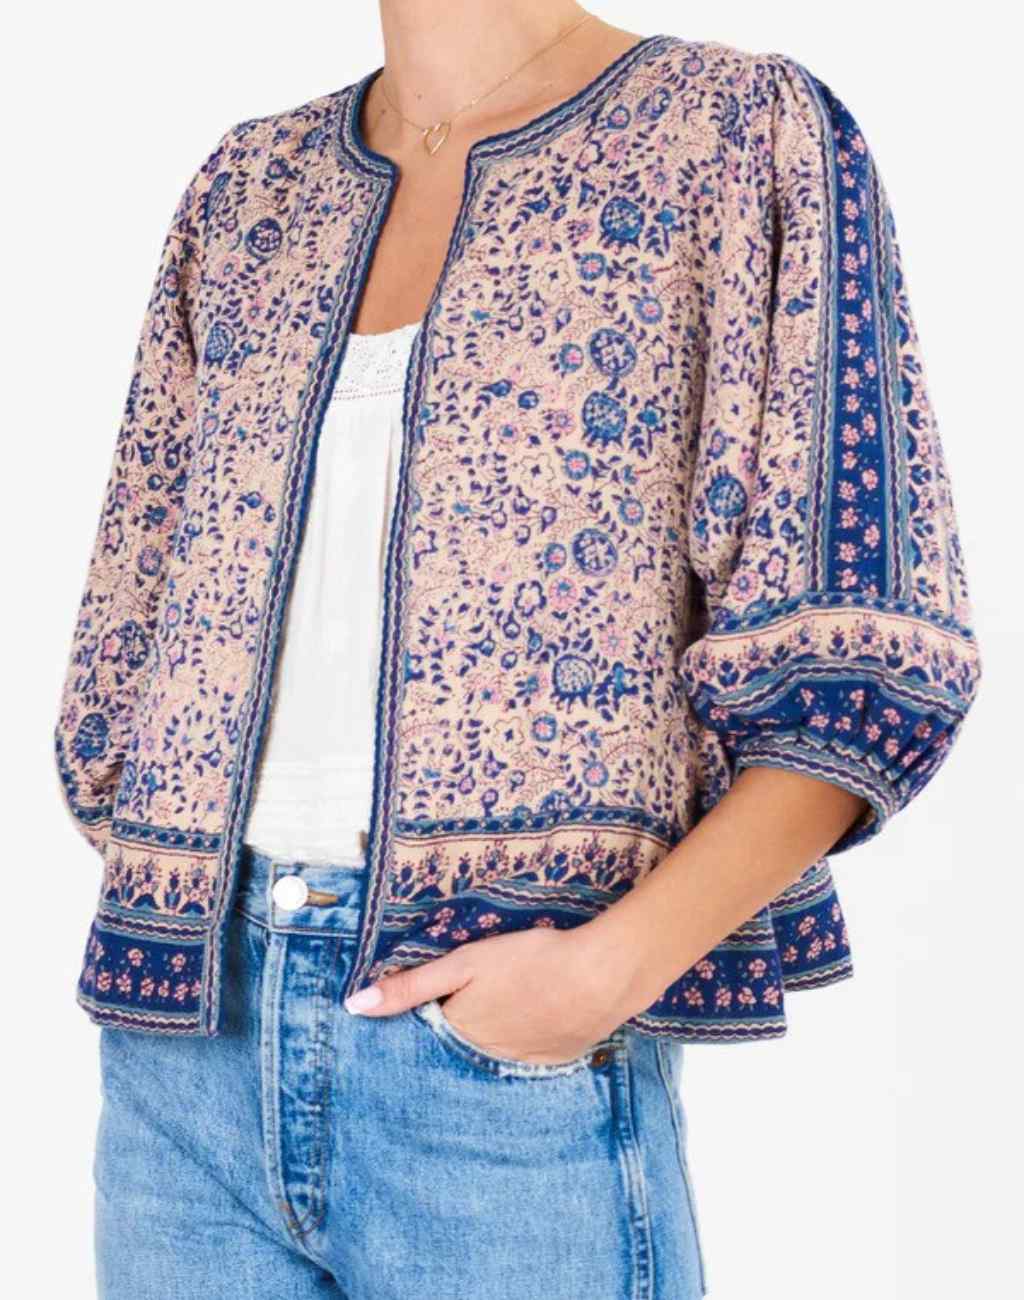 Block Print Cass Jacket with Contrasting Border on Hem and Cuffs